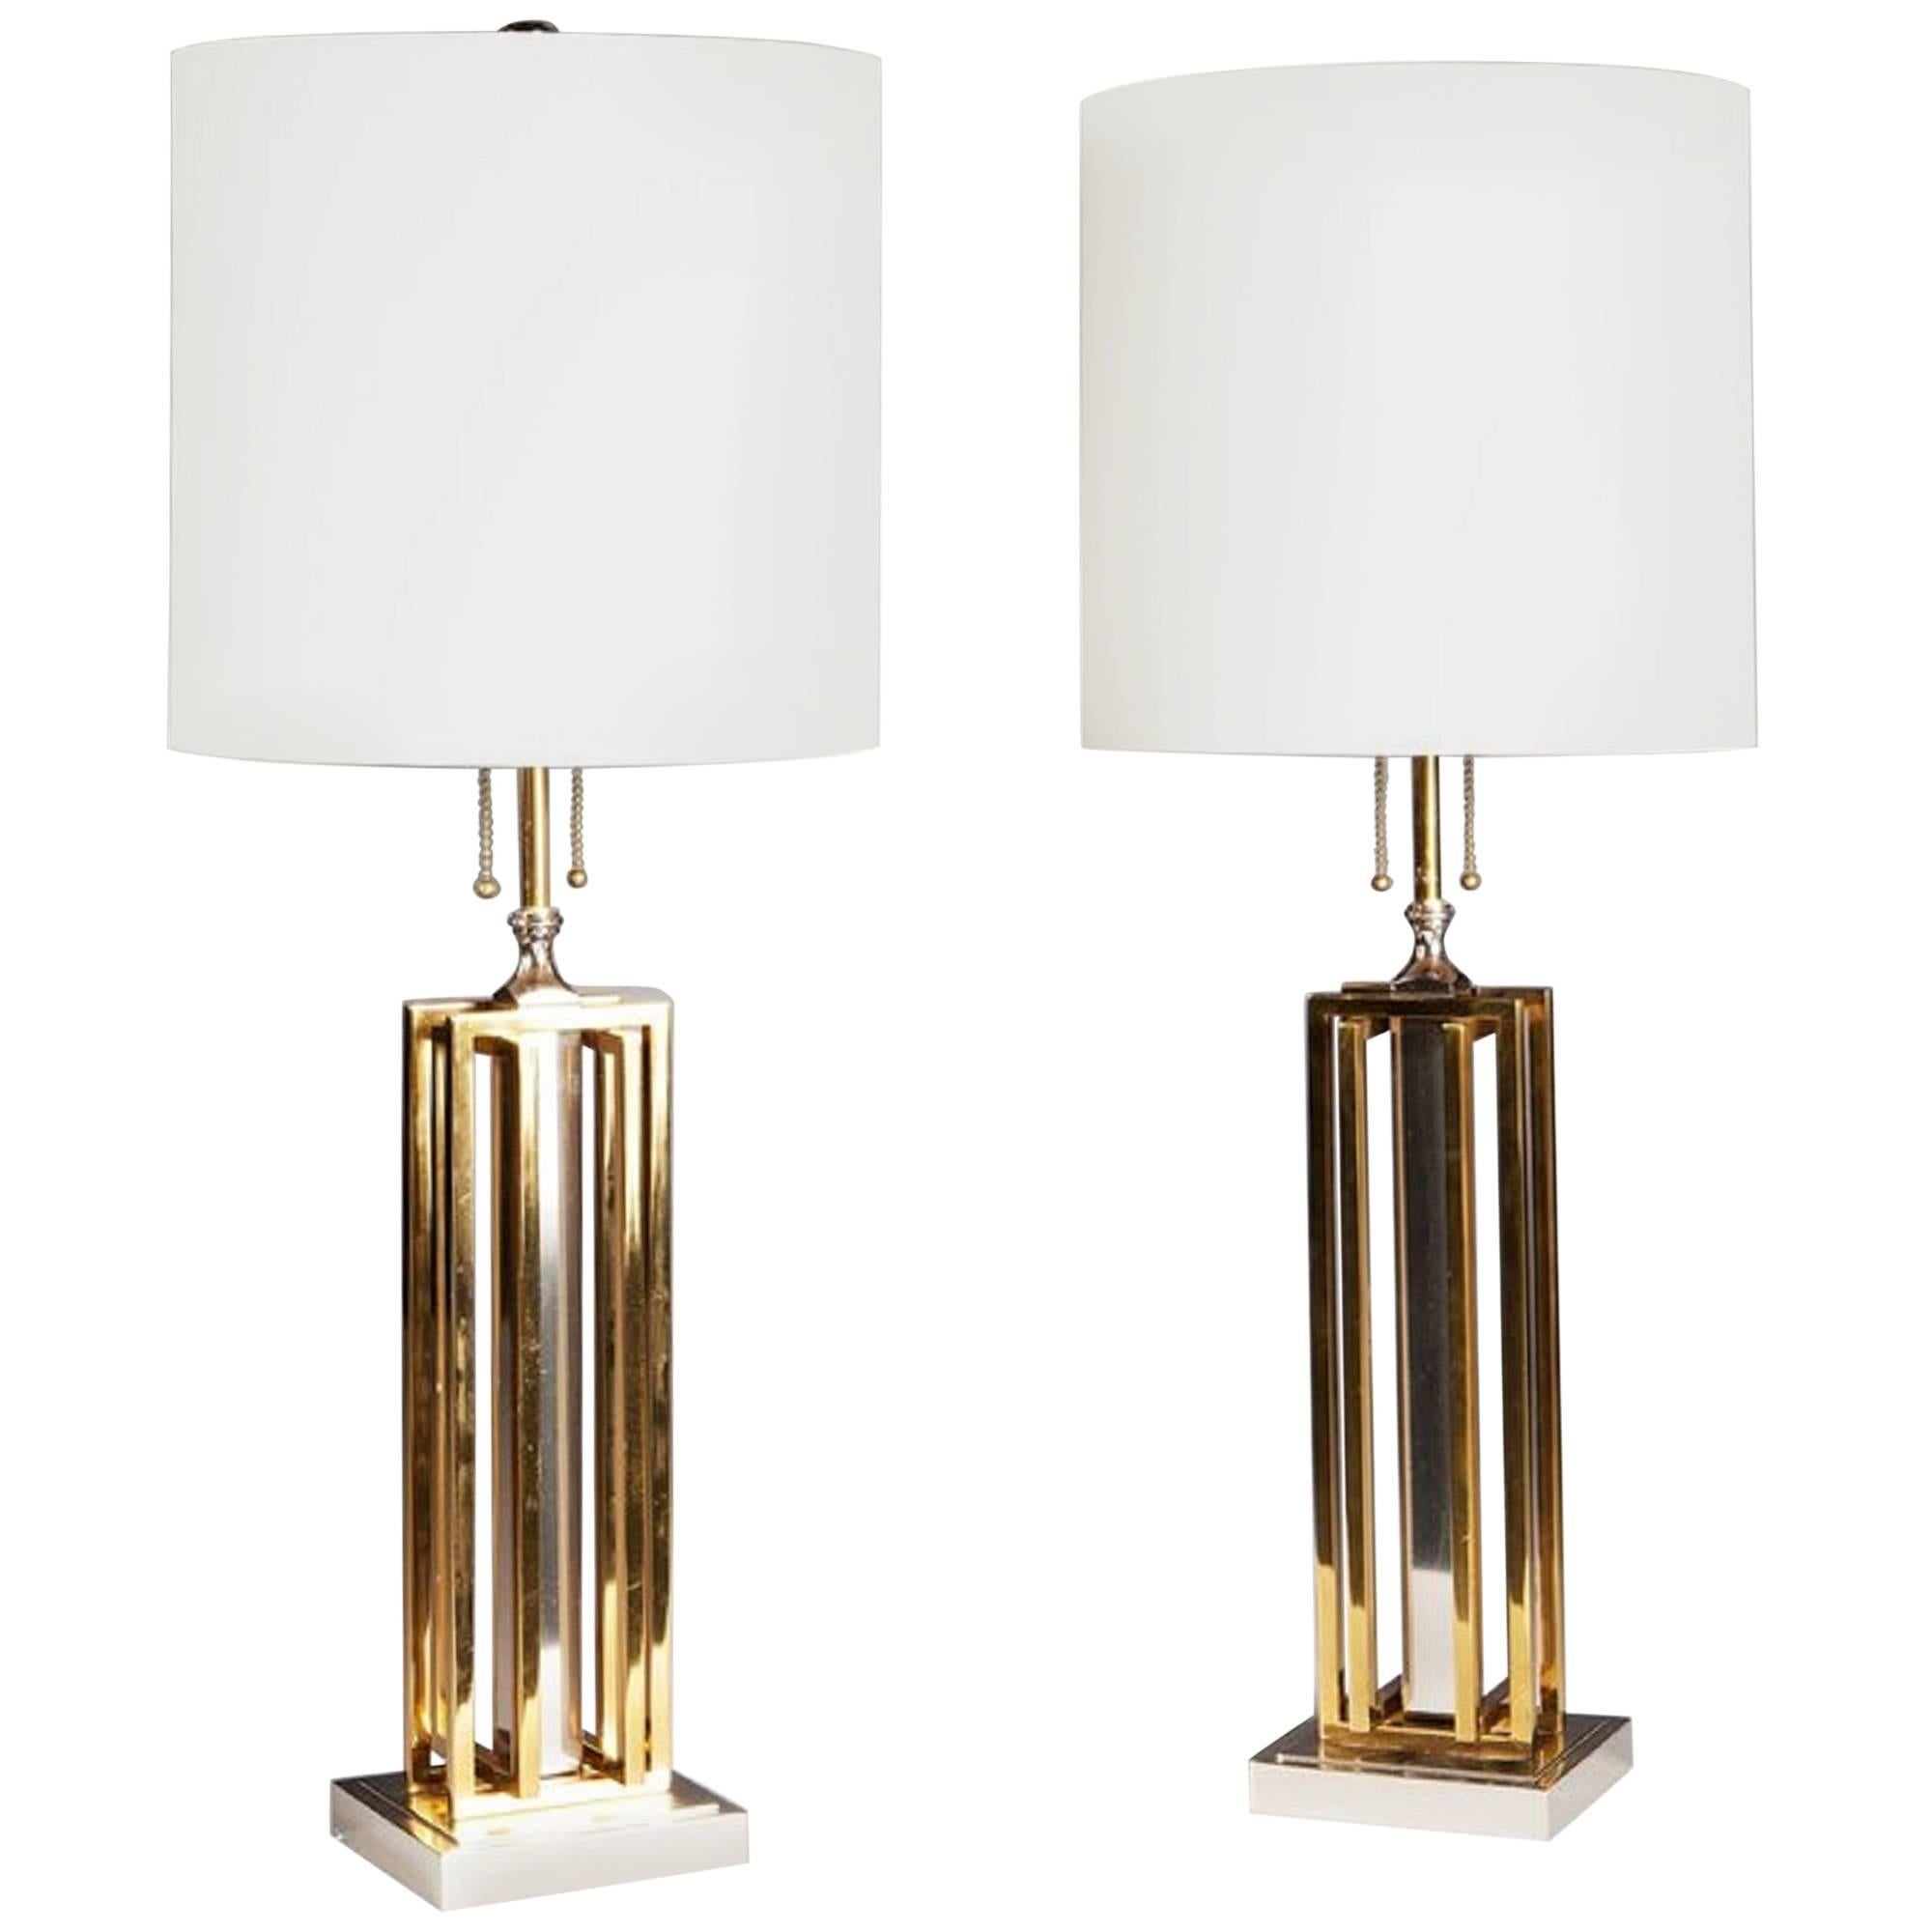 Pair of Willy Daro Lamps